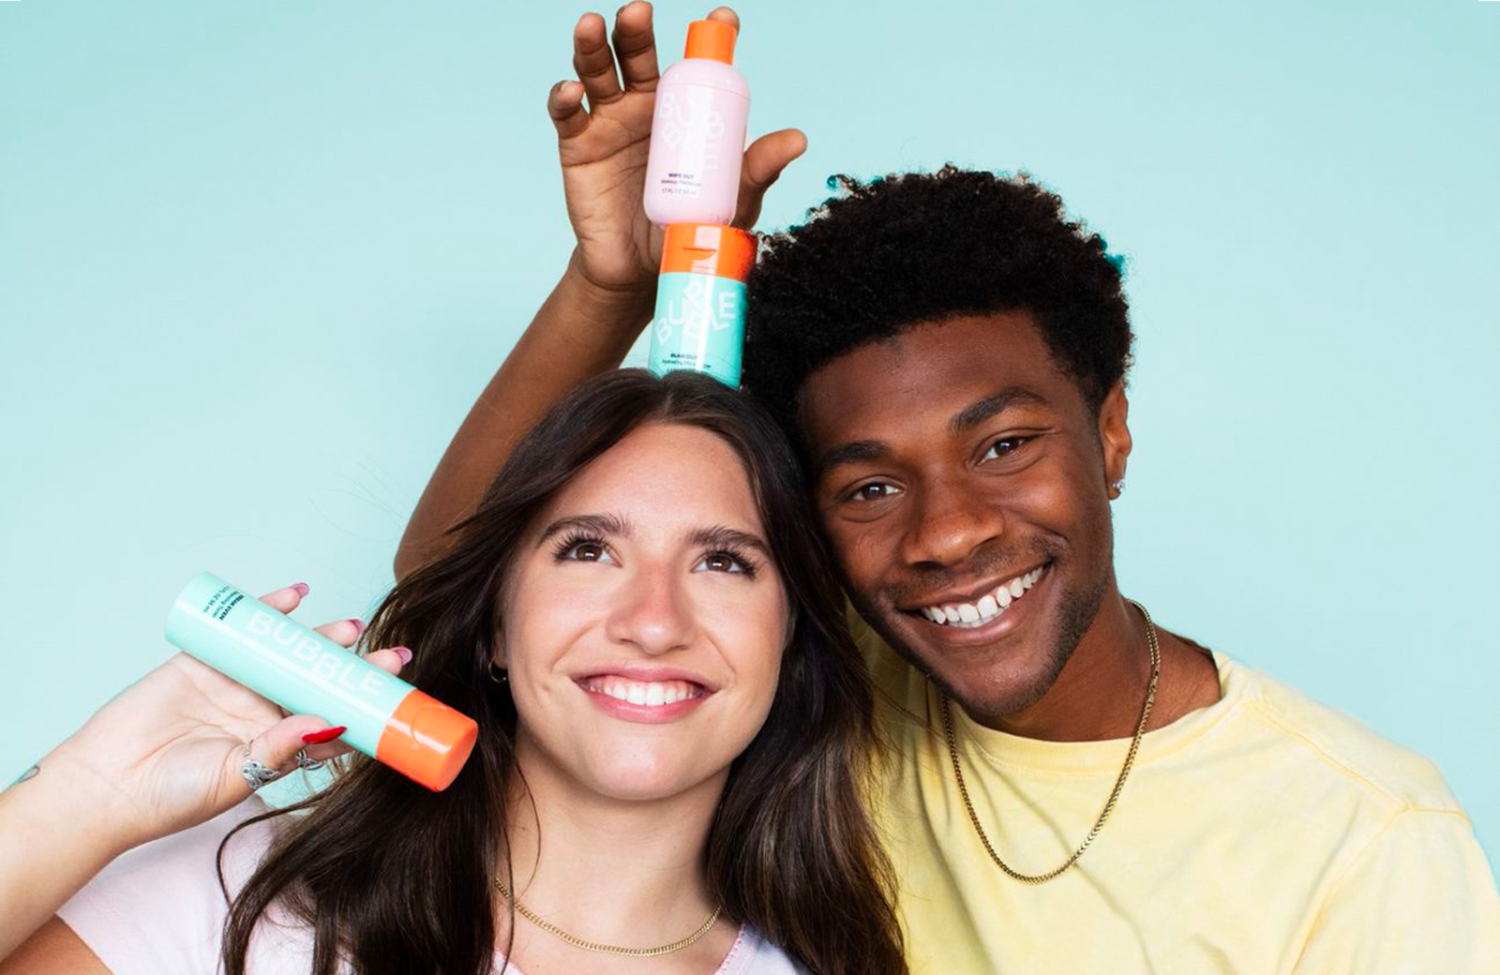 Bubble Skin Care Targets Gen Z With Launch At 3,900 Walmart Locations